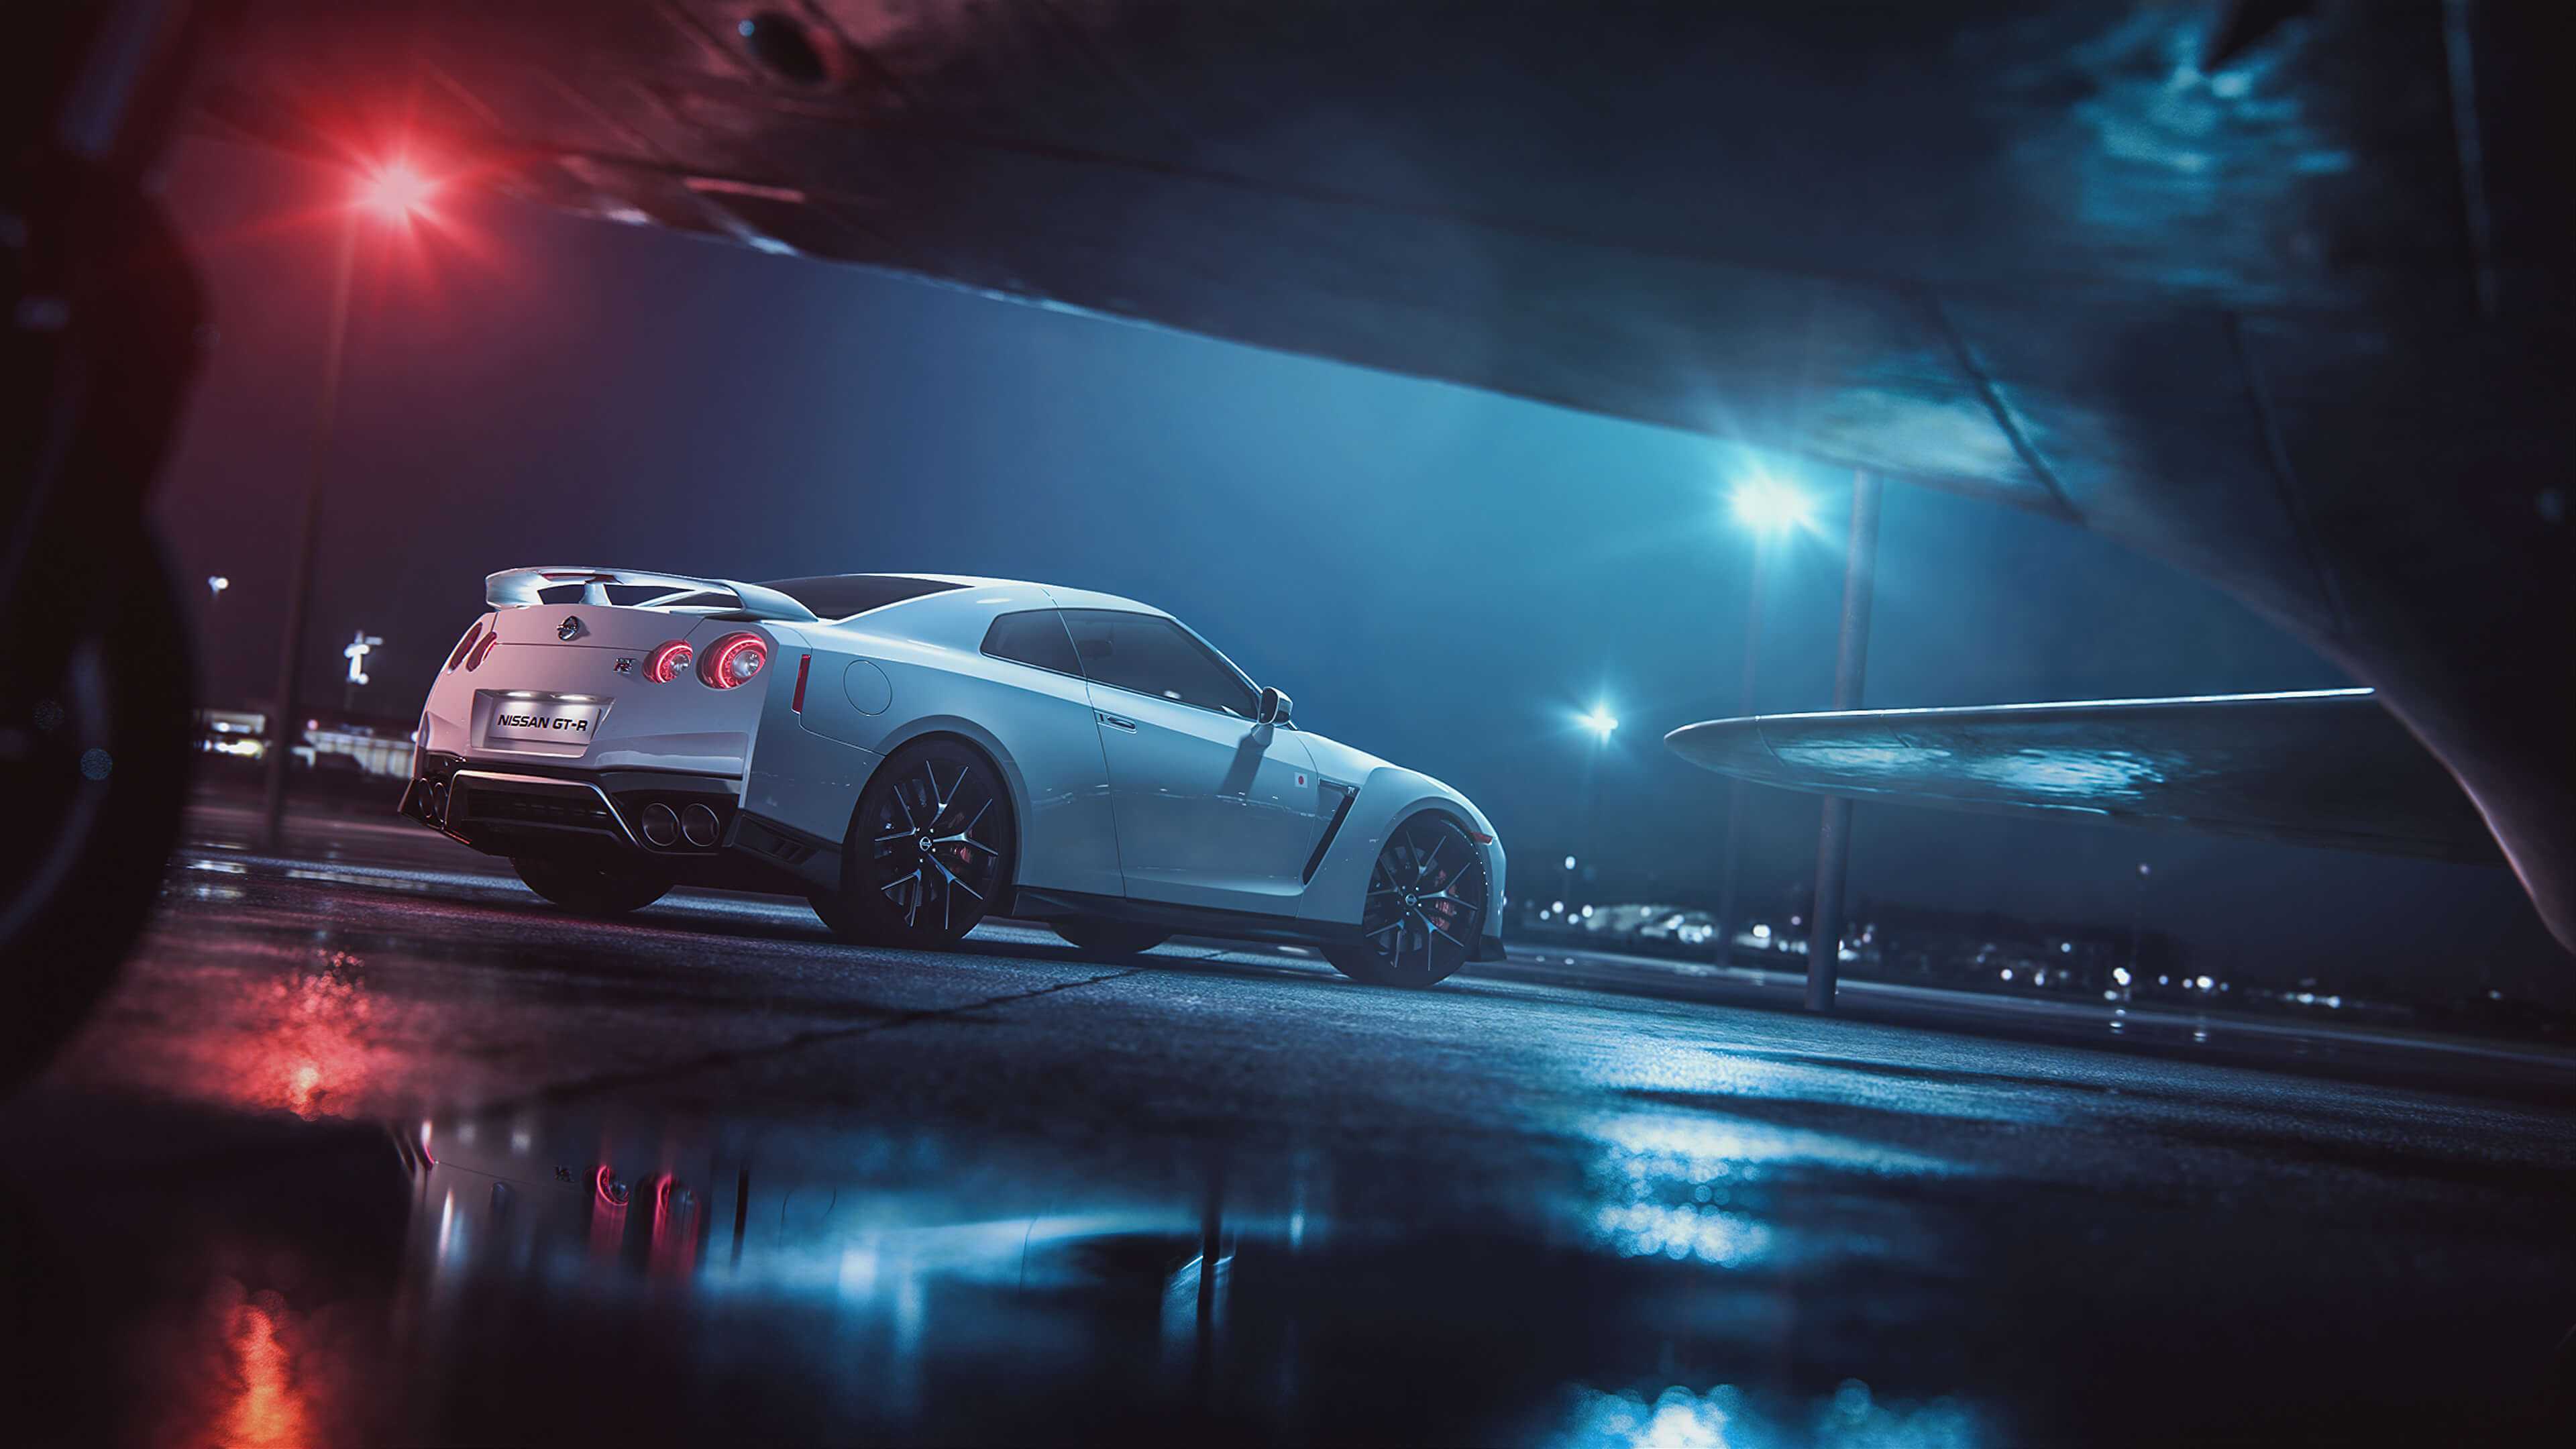 Nissan Gtr Background Awesome HD Wallpaper